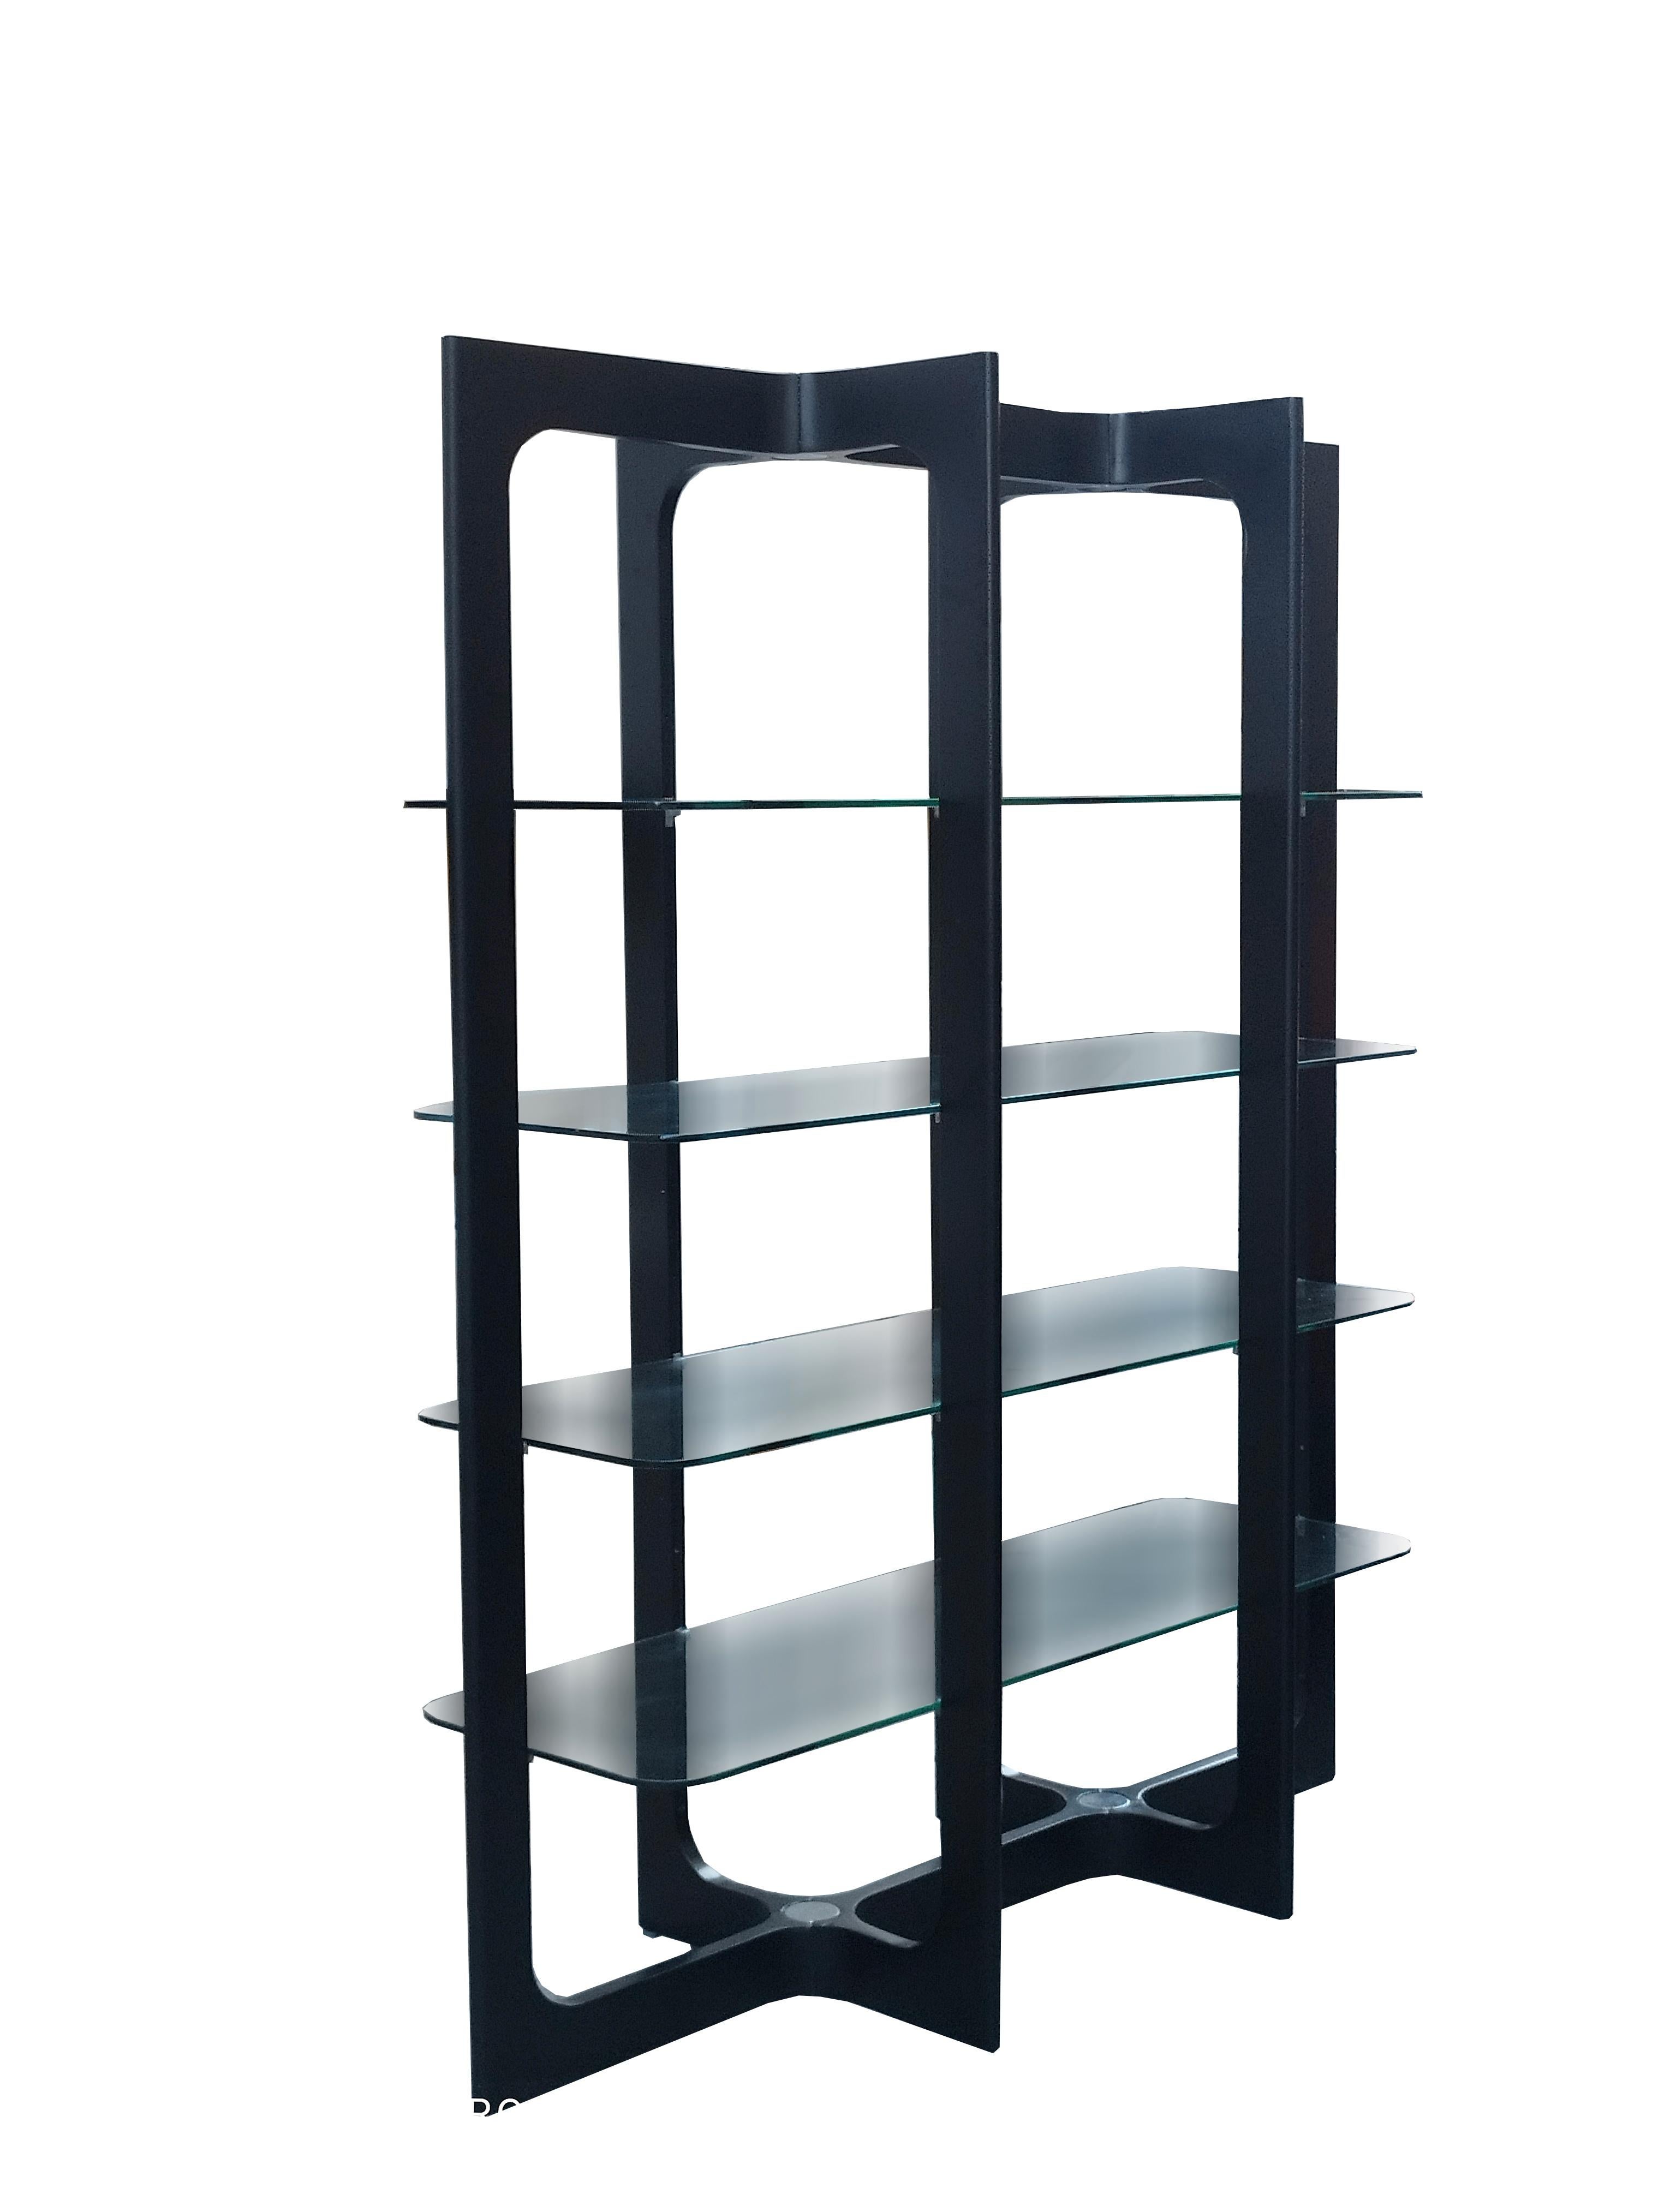 Etagere, bookcase or room divider from the 1970s made of black curved solid wood, 4 glass shelves and round chrome-plated steel supports. Its lines create a rhythm and a geometric design. Production Bernini, Italy 1970.